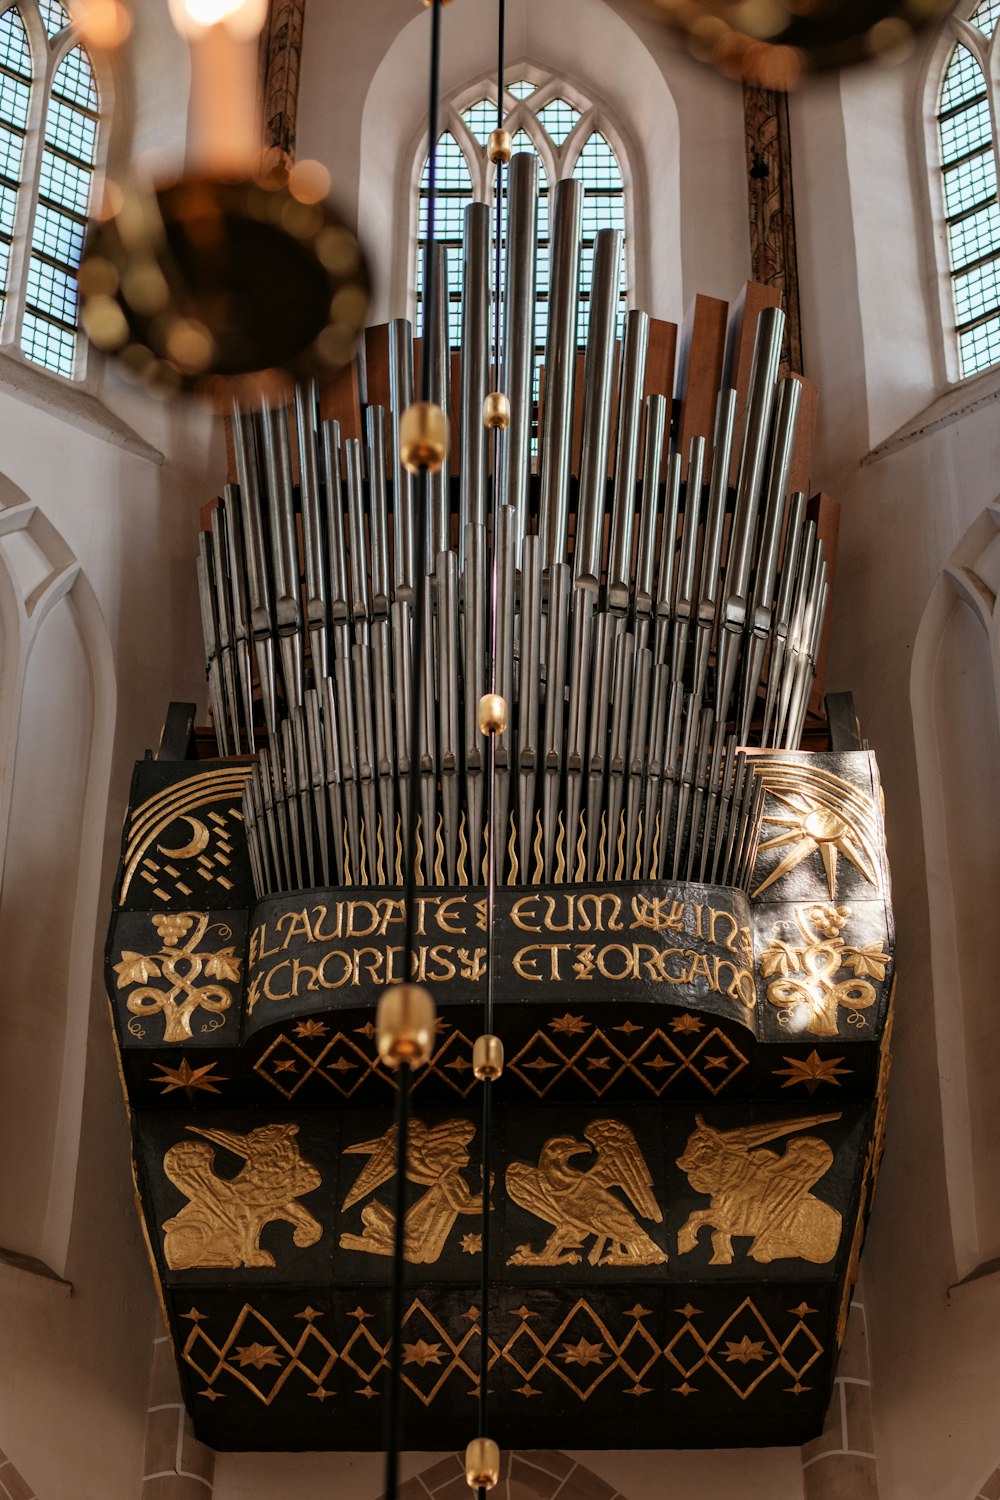 a pipe organ in a church with stained glass windows